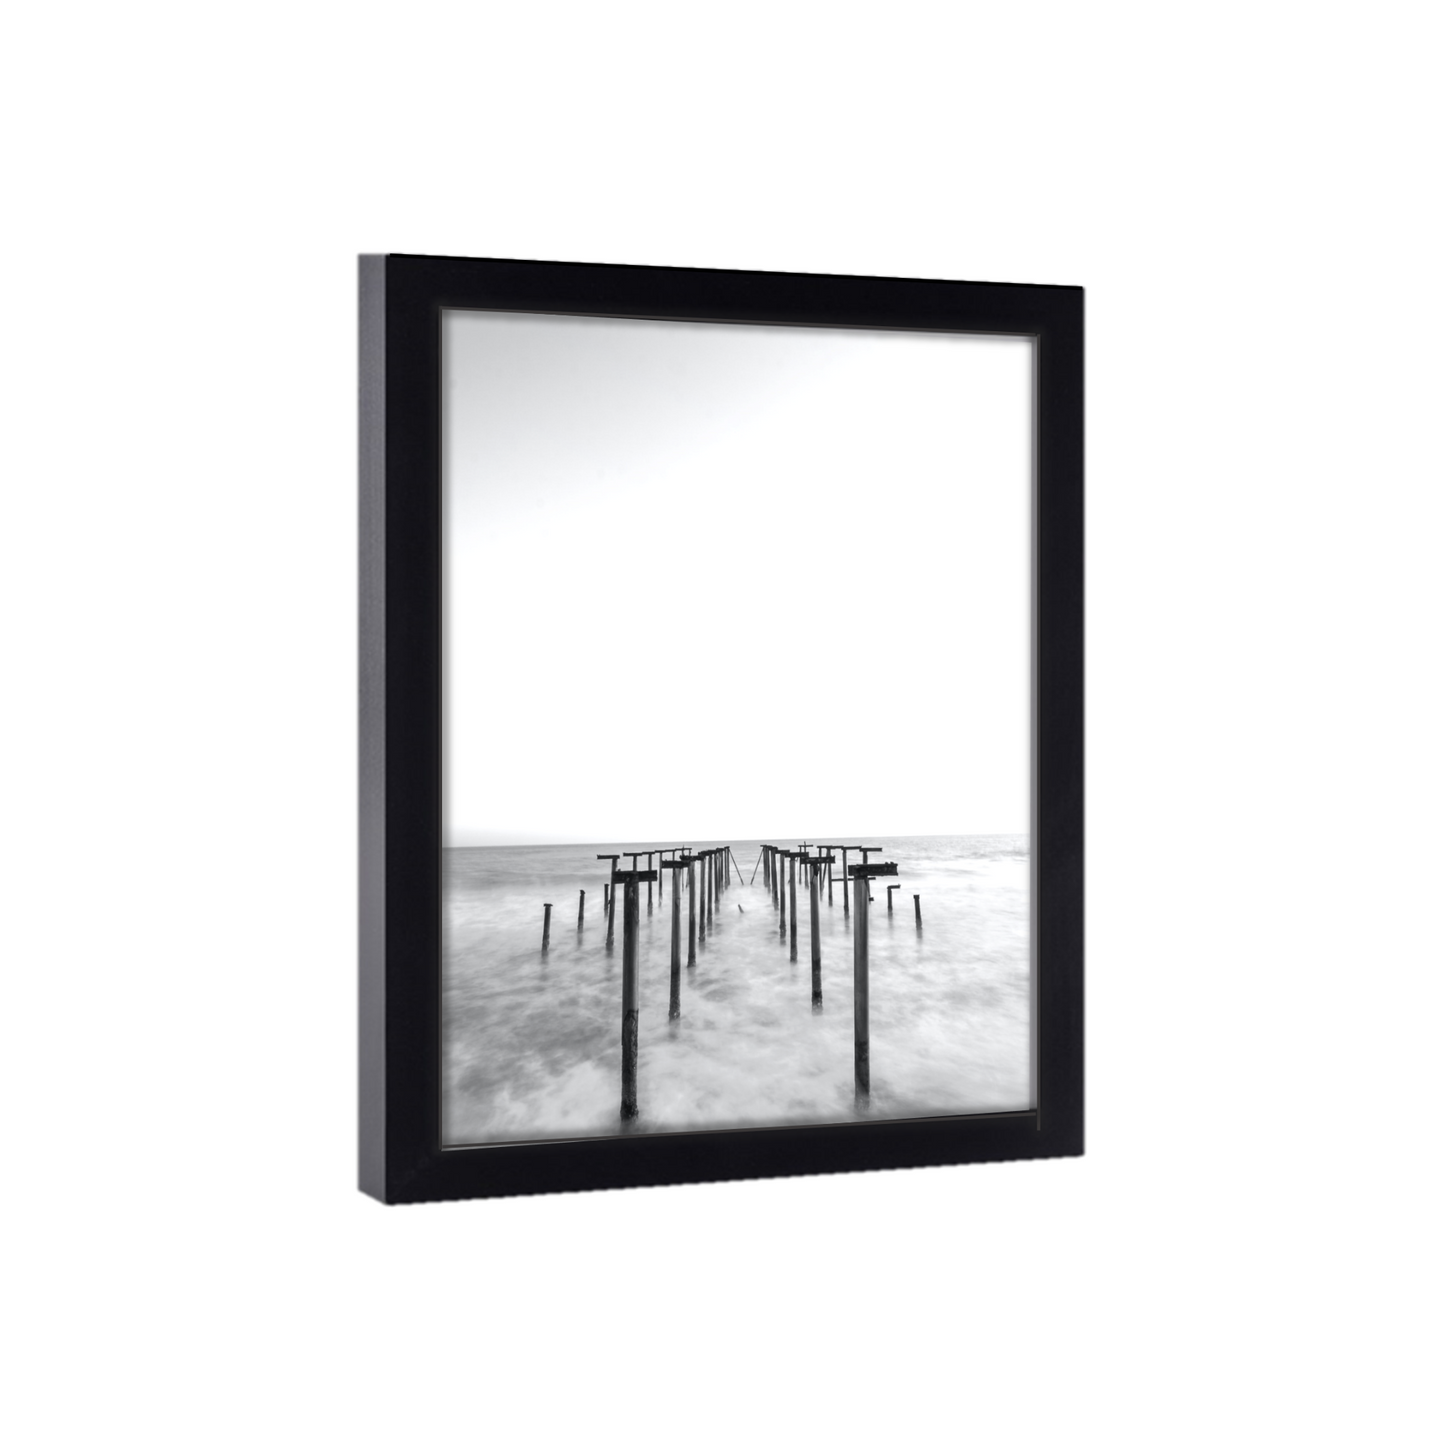 Gallery Wall 26x8 Picture Frame Black Wood 26x8  Poster Size